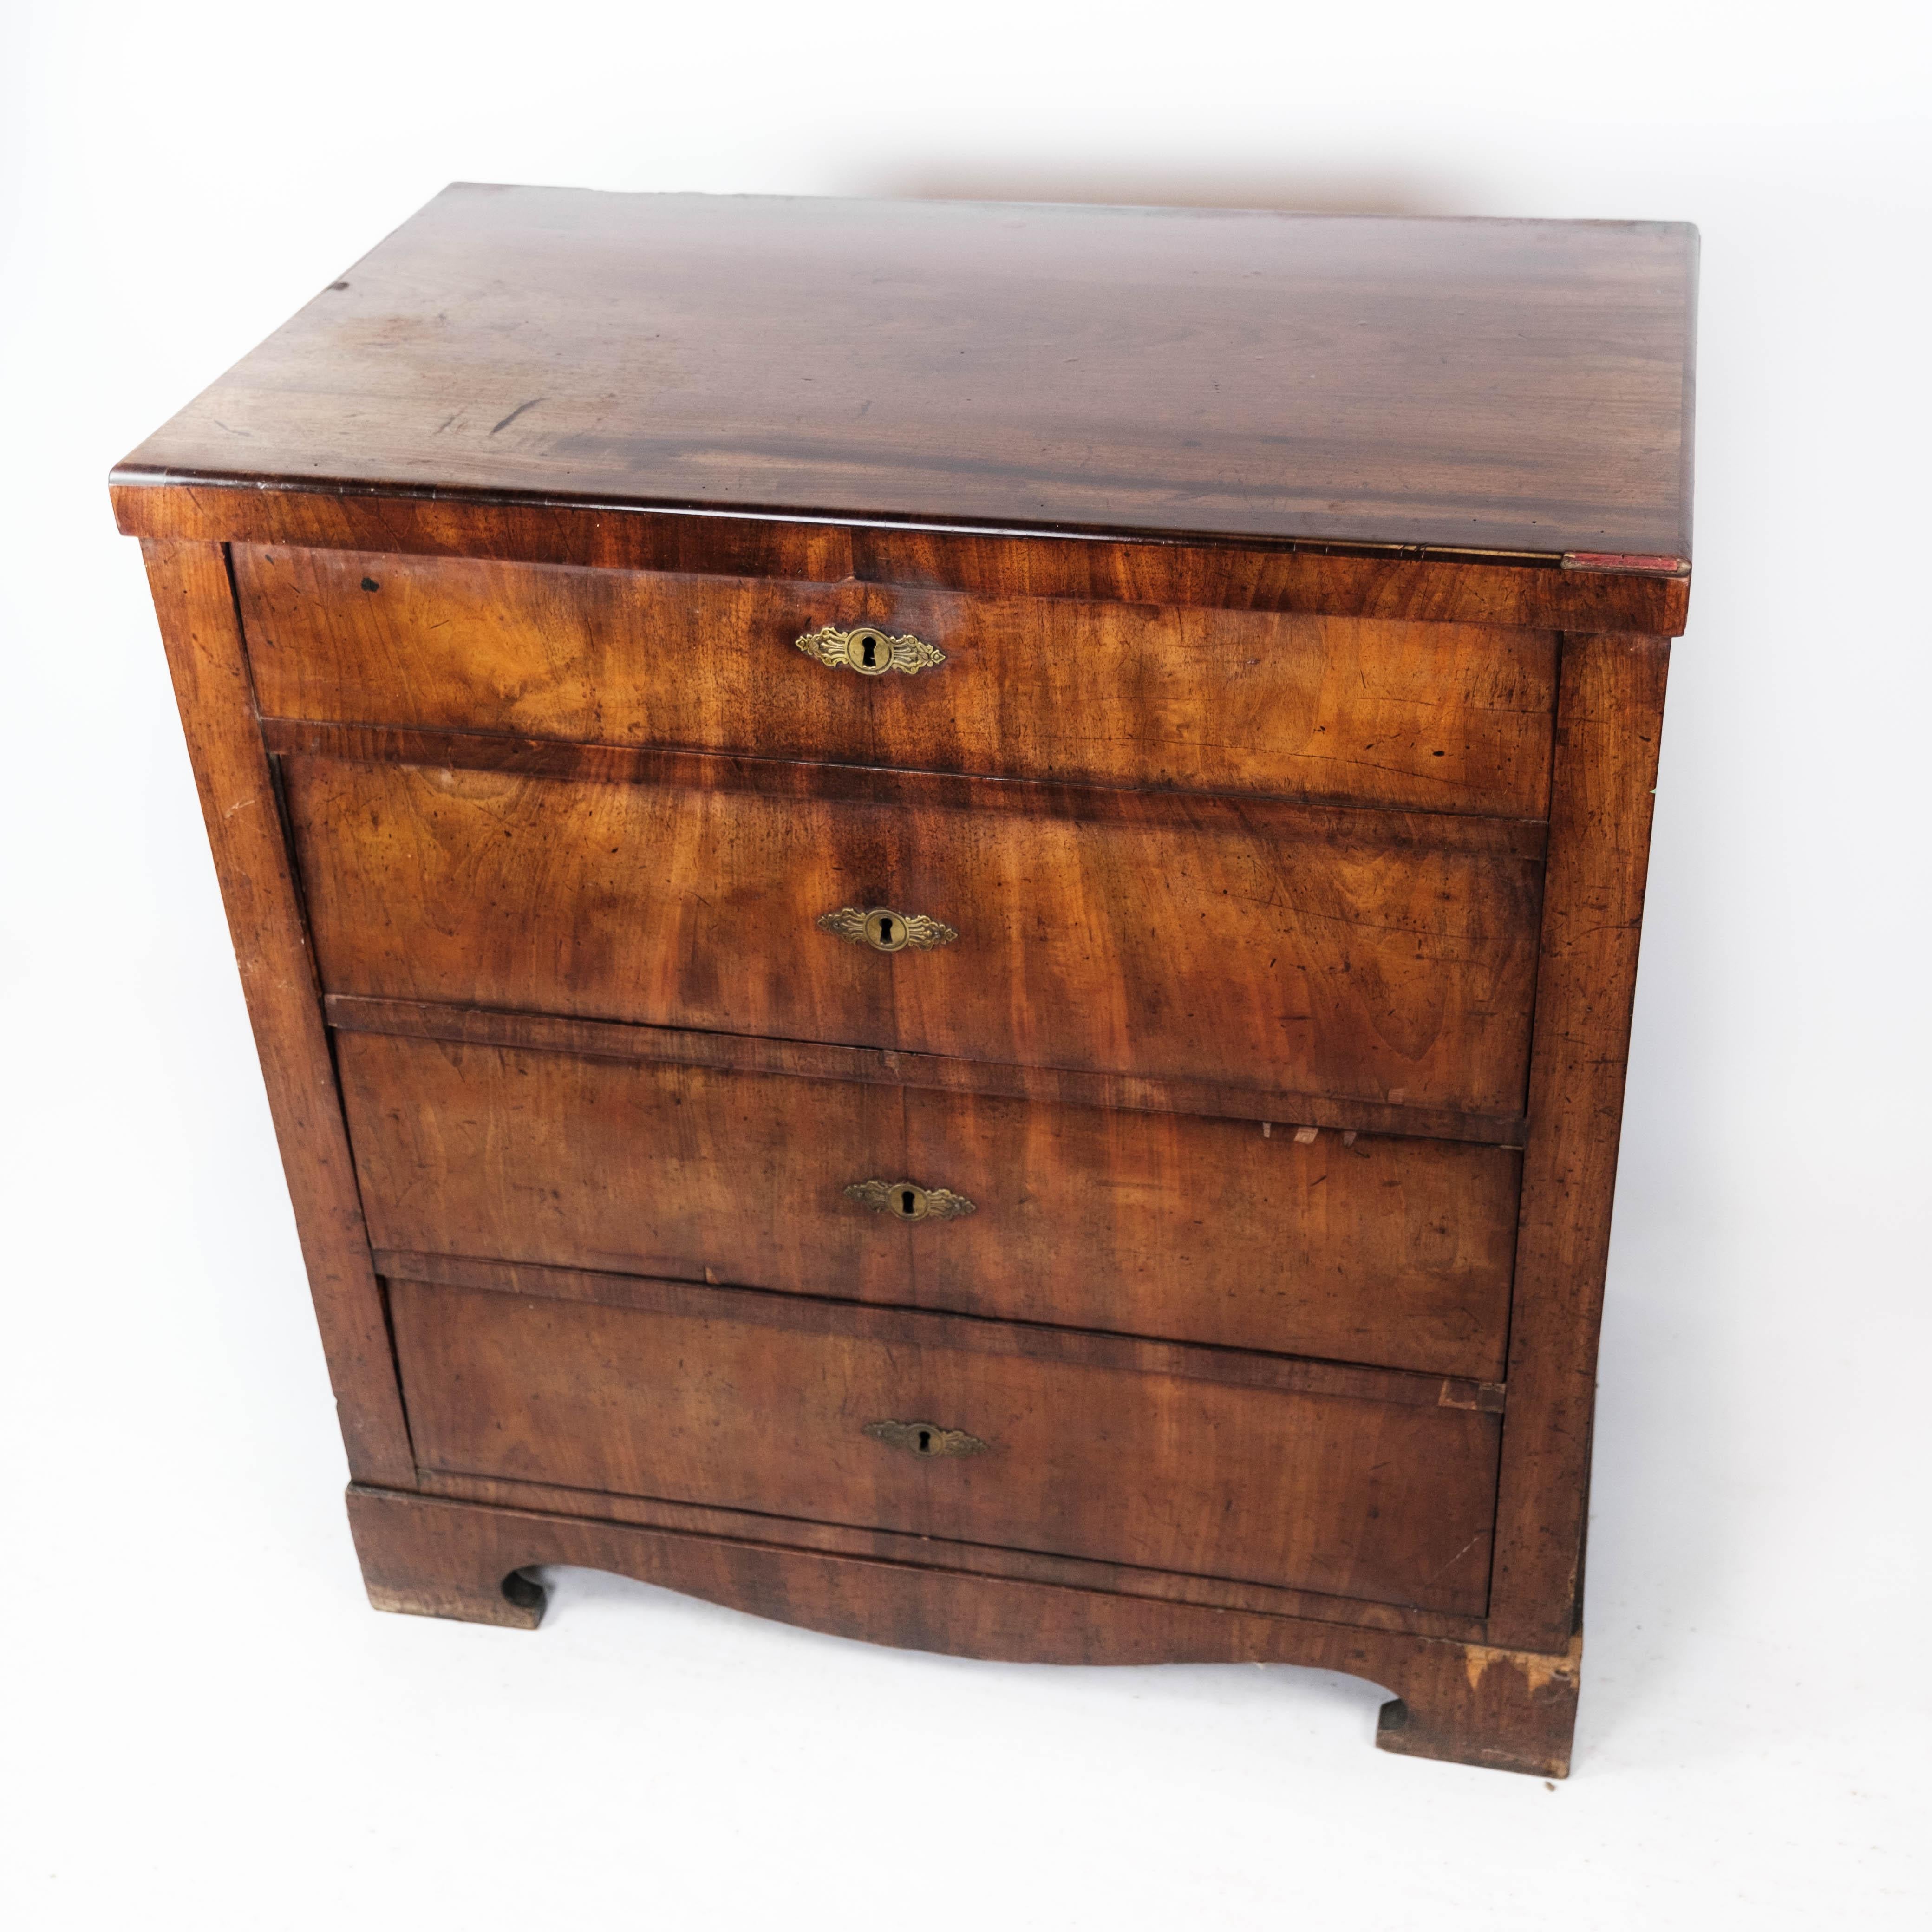 
This exquisite Empire chest of drawers boasts a timeless design and is crafted from rich mahogany, reflecting the elegance of the 1840s. With its stately presence and intricate detailing, it serves as both a functional storage piece and a